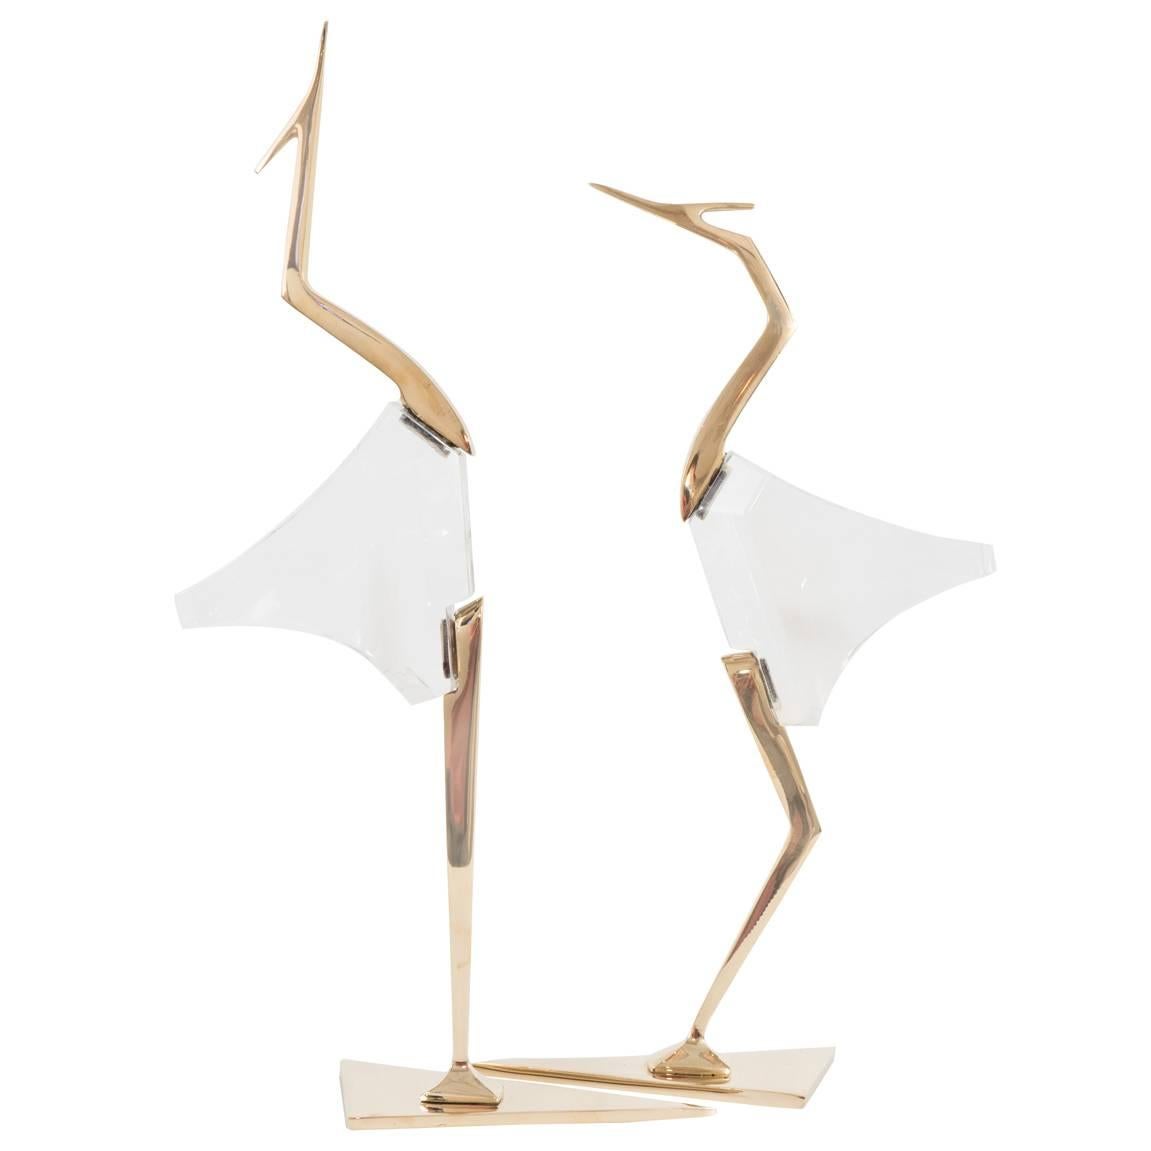 Pair of Stylized Crane Sculptures